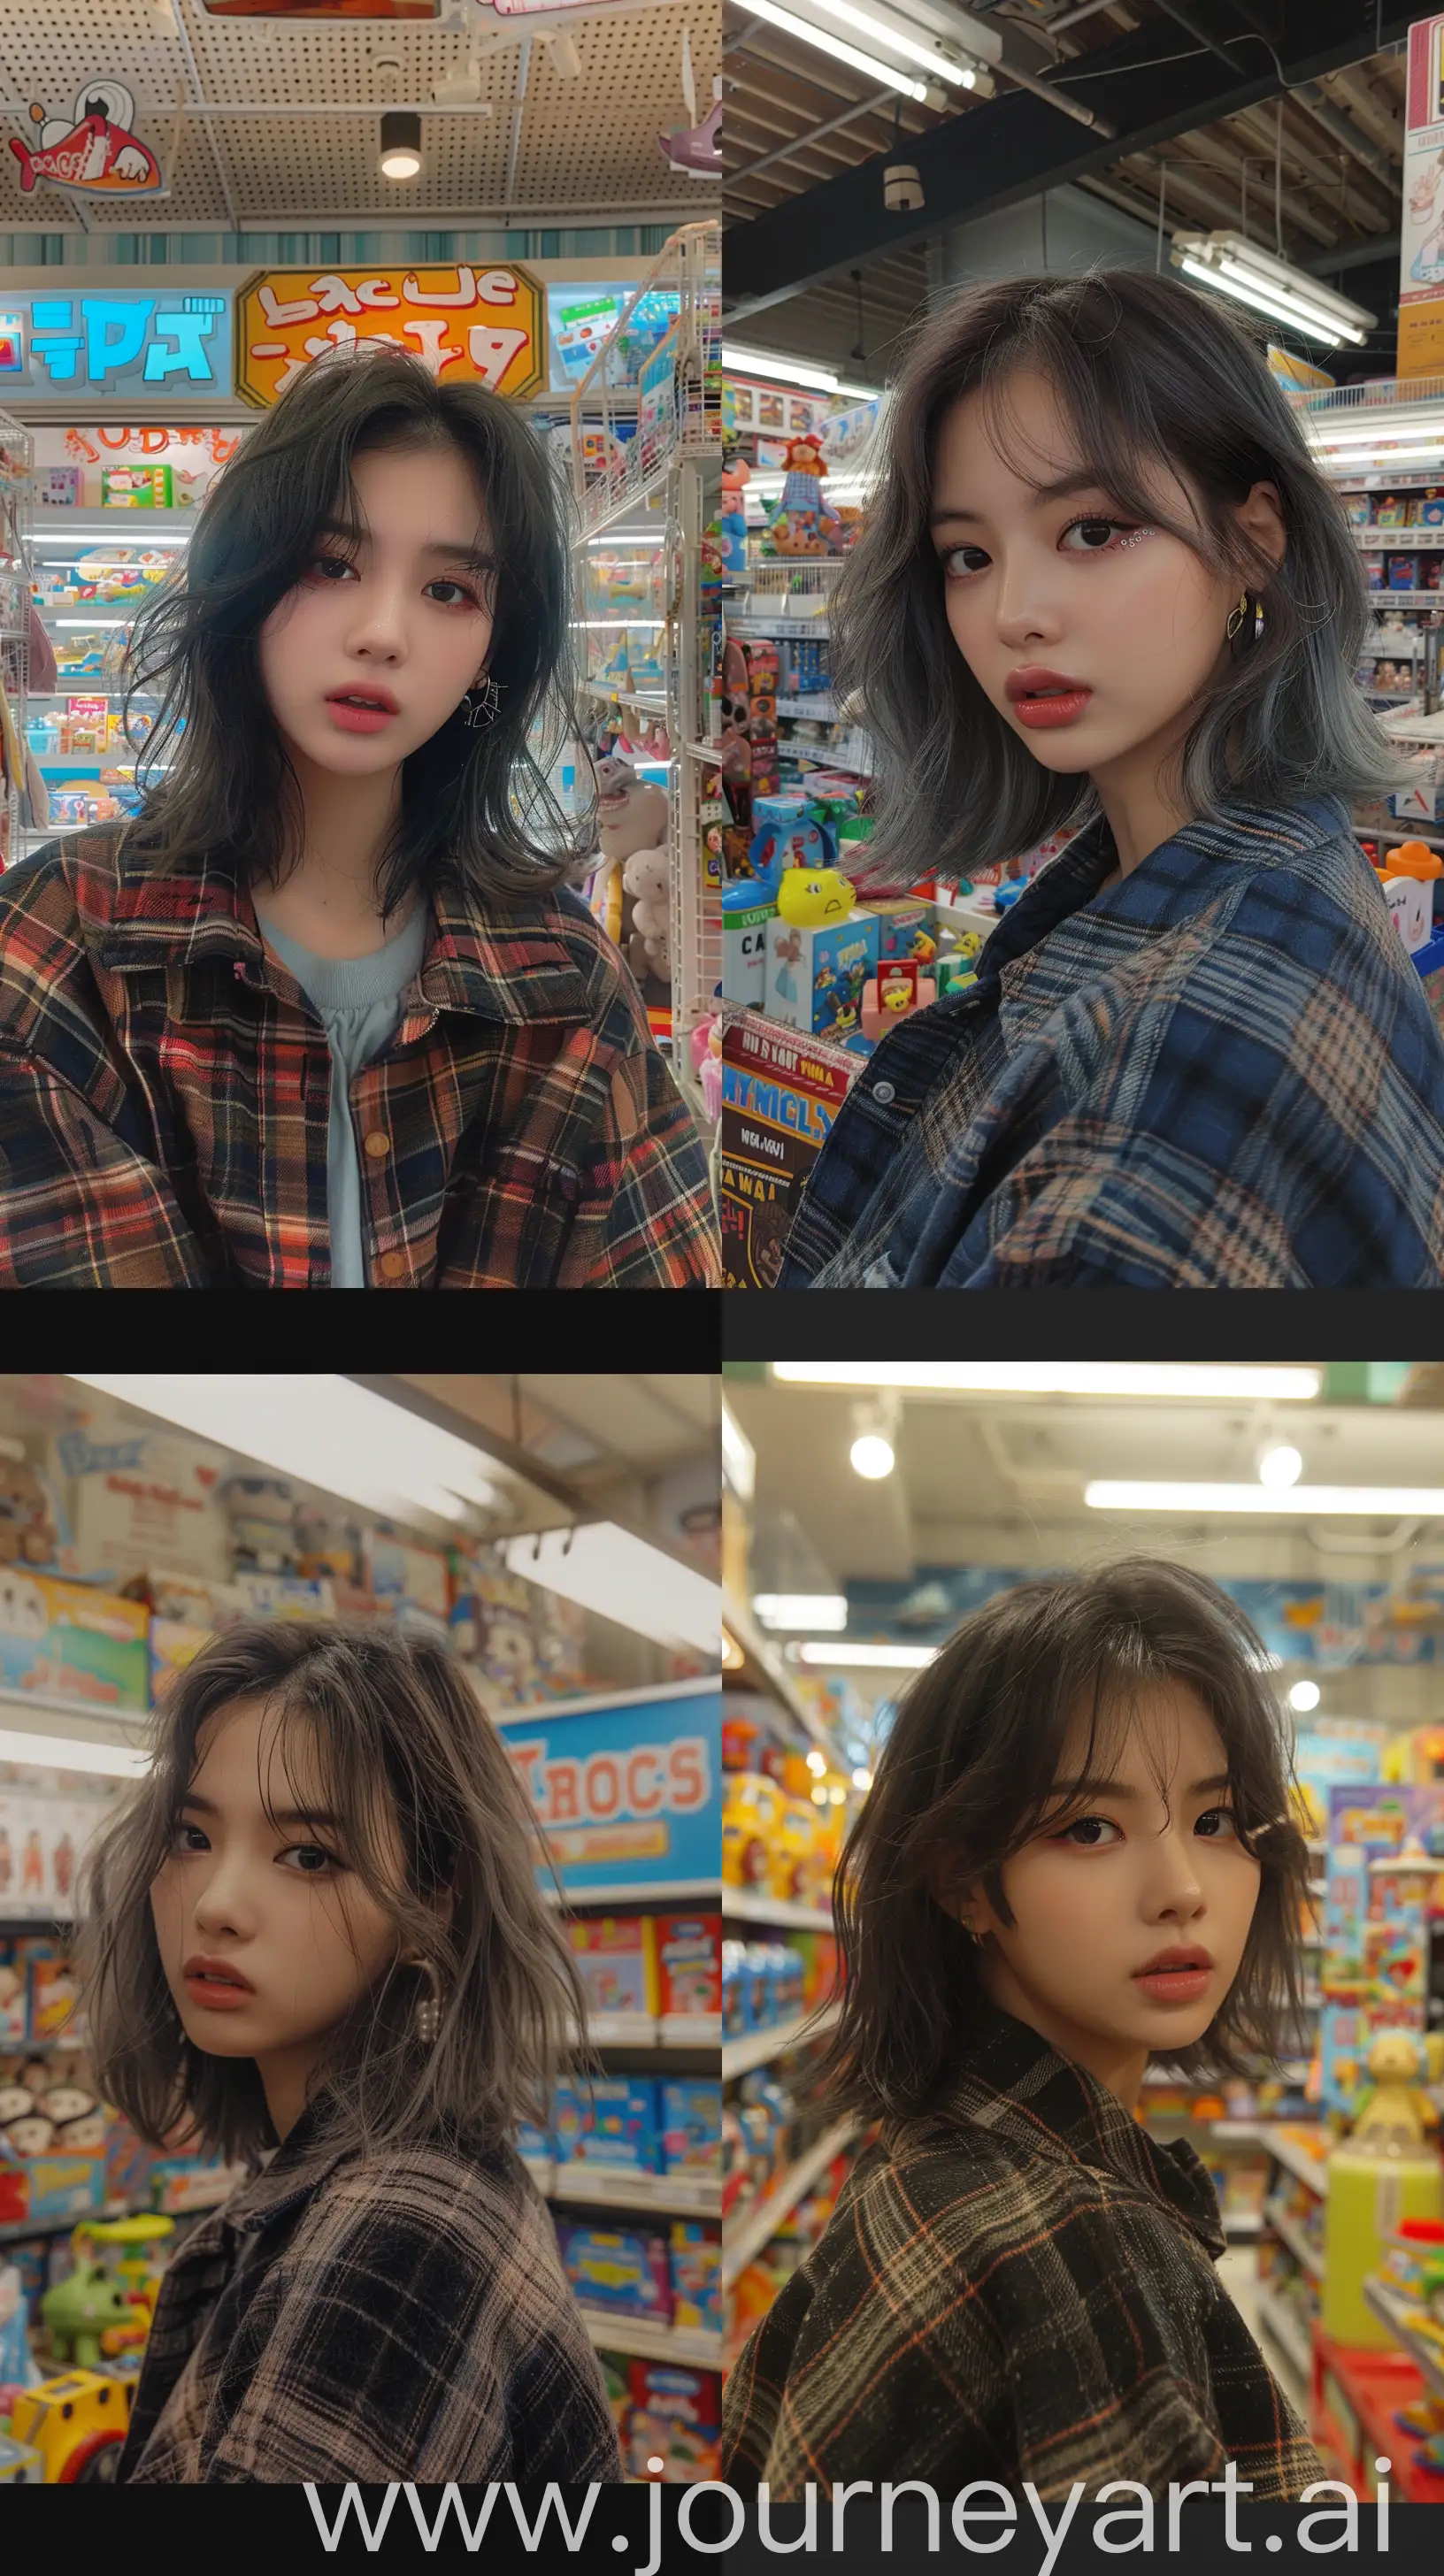 Blackpinks-Jennie-with-Medium-Wolfcut-Hair-in-Grunge-Aesthetic-at-Toys-Store